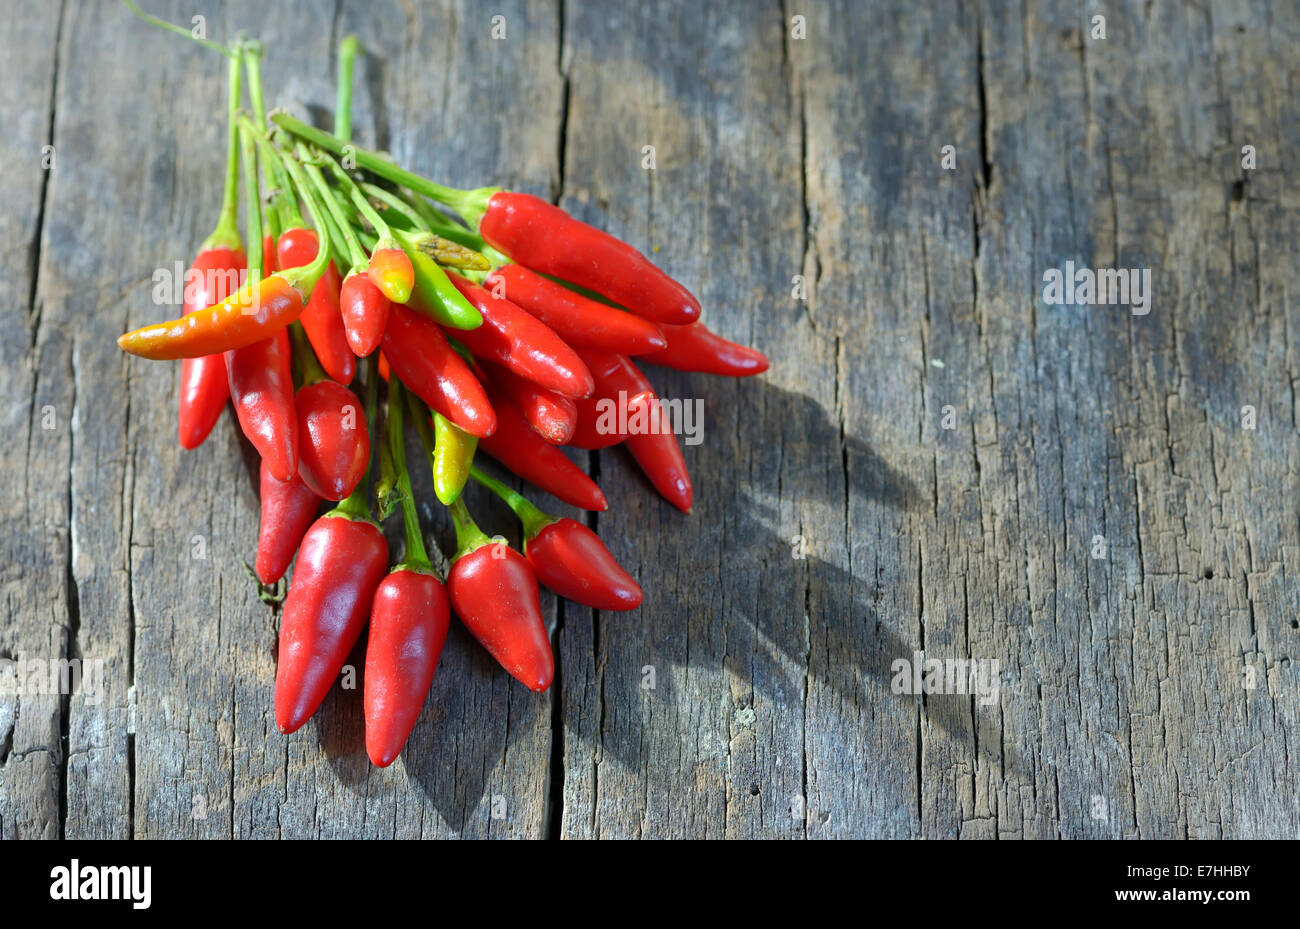 Chili pepper on old wood table Stock Photo